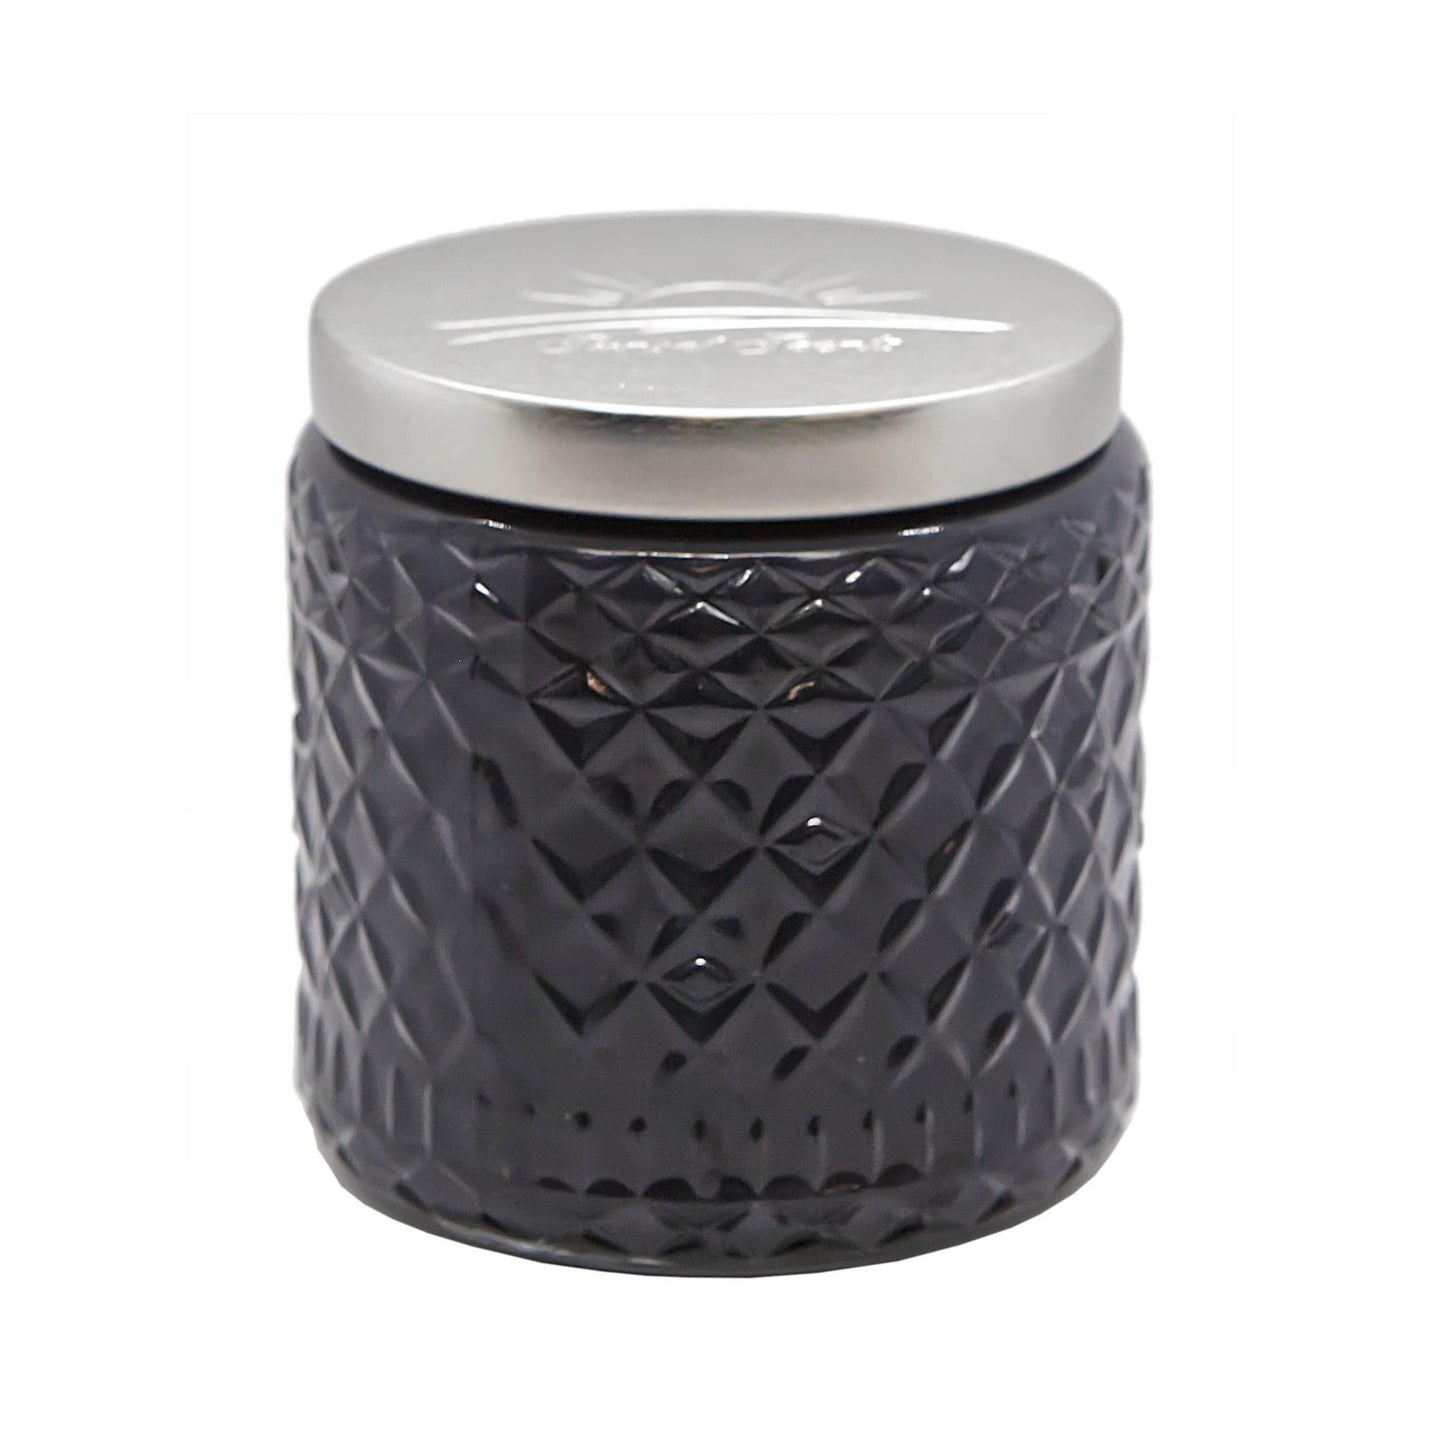 Moonlit Patchouli Scented Candle